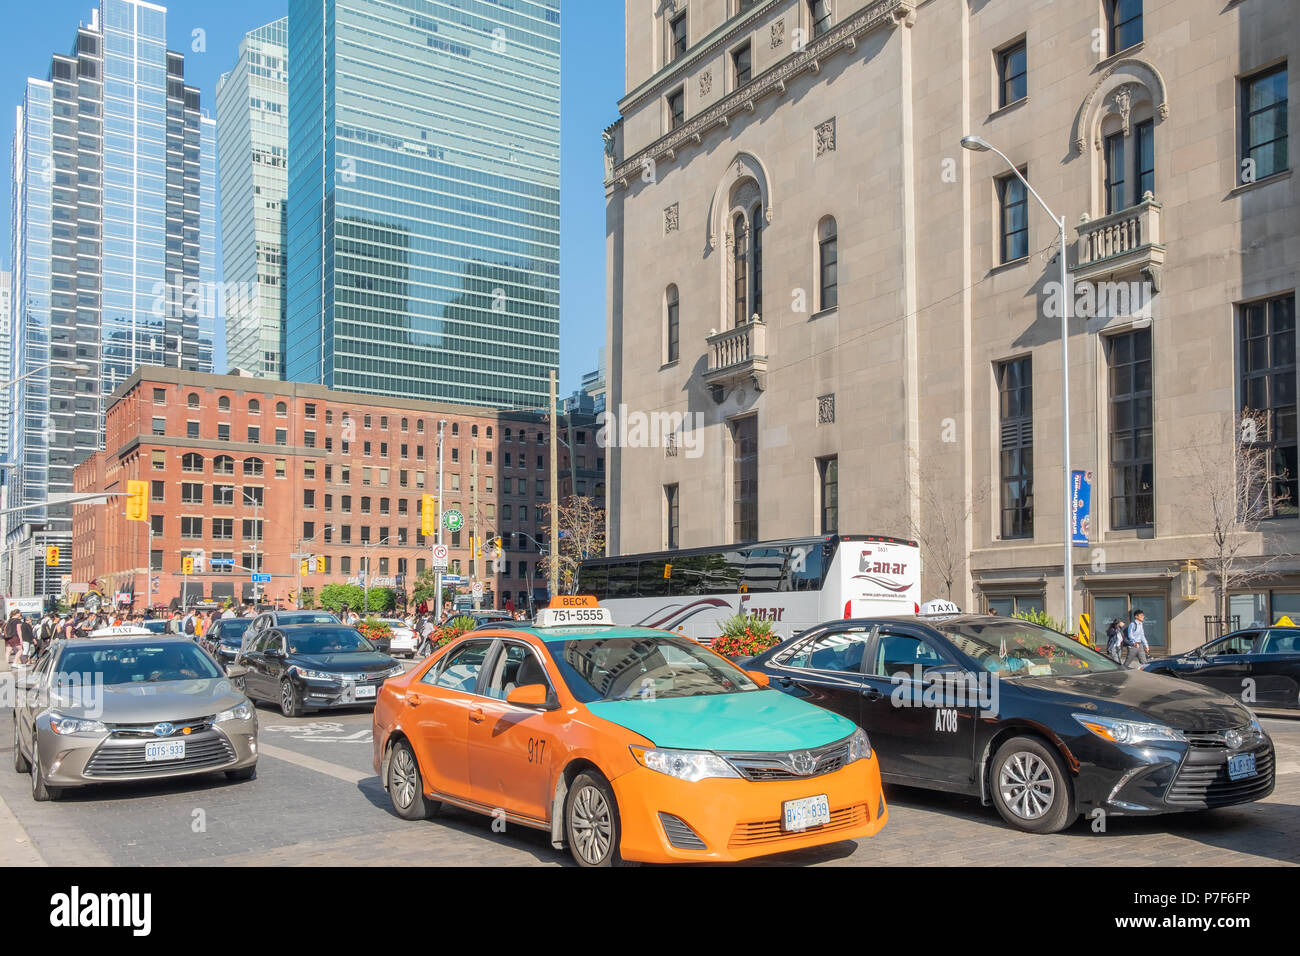 Morning rush hour traffic along Front Street in Toronto near the Royal York Hotel.  Toronto has some of the worst traffic problems in the world. Stock Photo